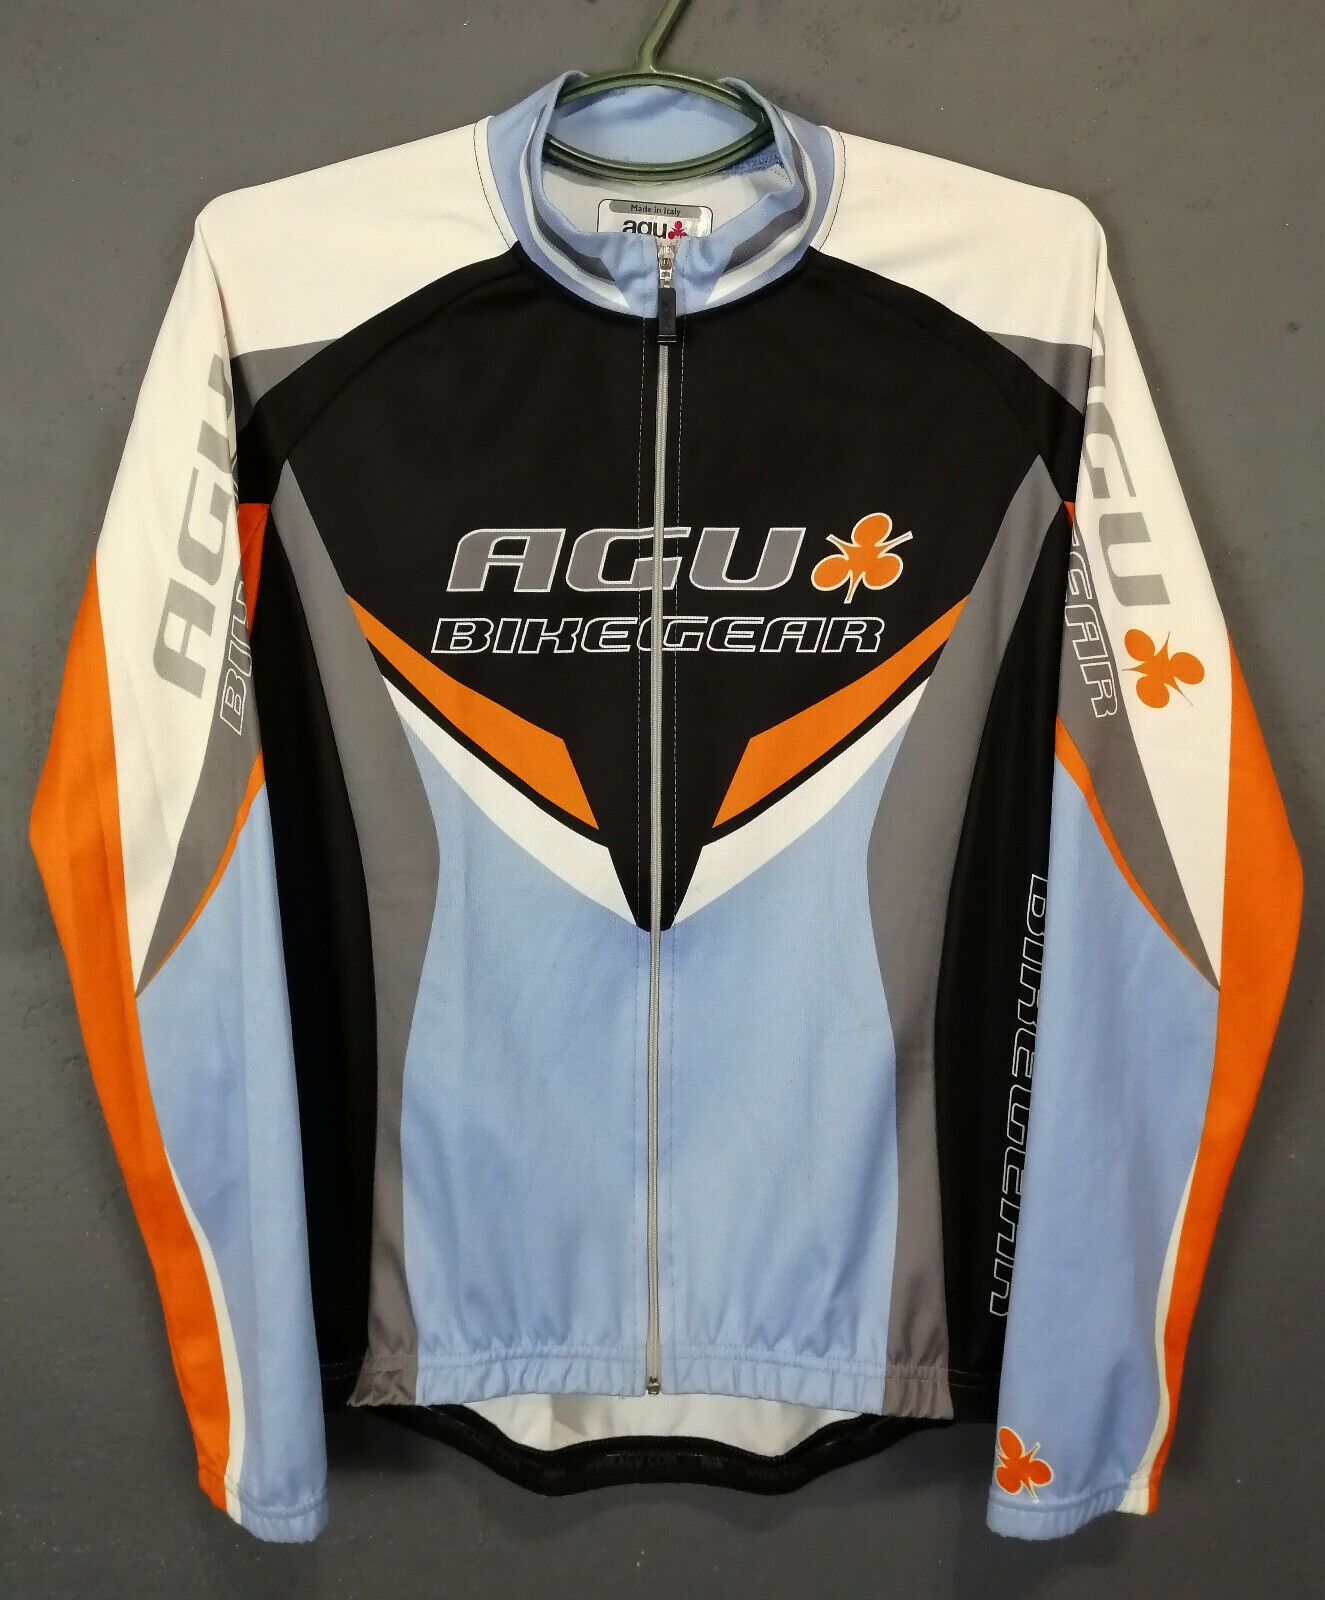 LONG SLEEVE MEN'S SHIRT AGU ITALY BIKE CYCLING CA Kansas Outlet SALE City Mall JERSEY BICYCLE